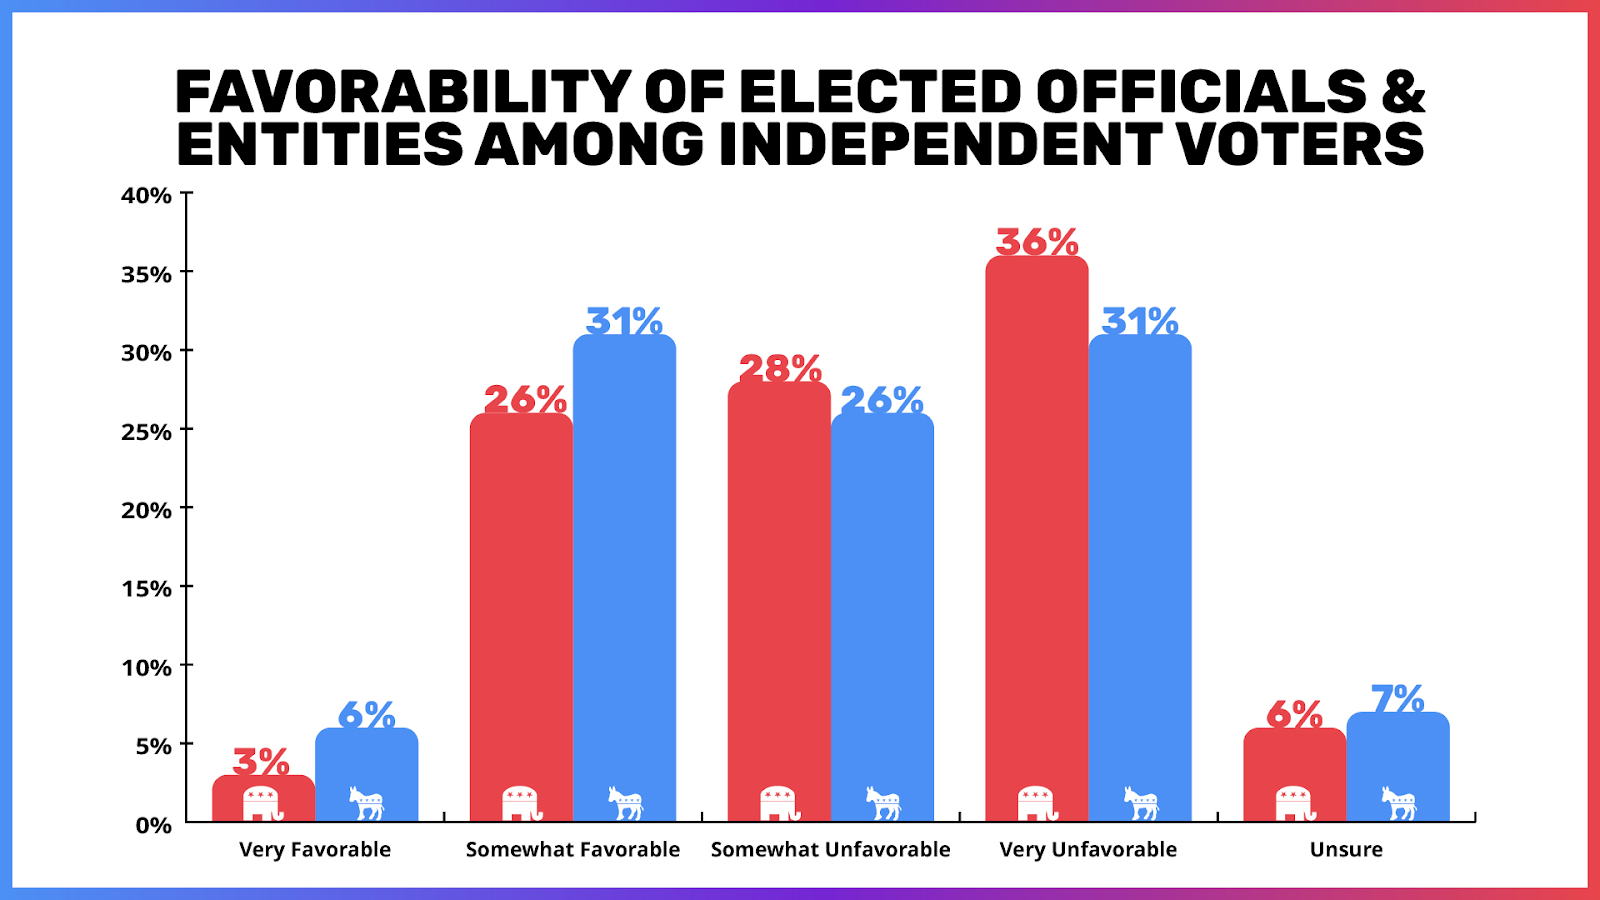 A bar chart titled 'Favorability of Elected Officials & Entities Among Independent Voters.' It shows four sets of bars representing percentages of responses: 'Very Favorable,' 'Somewhat Favorable,' 'Somewhat Unfavorable,' 'Very Unfavorable,' and 'Unsure.' The 'Very Favorable' category has very low percentages, with the blue bar slightly higher than the red. 'Somewhat Favorable' sees the blue bar at 31% overtaking the red. 'Somewhat Unfavorable' is equal for both colors at 26%, while 'Very Unfavorable' has a blue majority at 36%. 'Unsure' is the least, with the blue bar at 7%. Blue represents one political group, red another, indicated by small icons of an elephant for the blue and a donkey for the red.